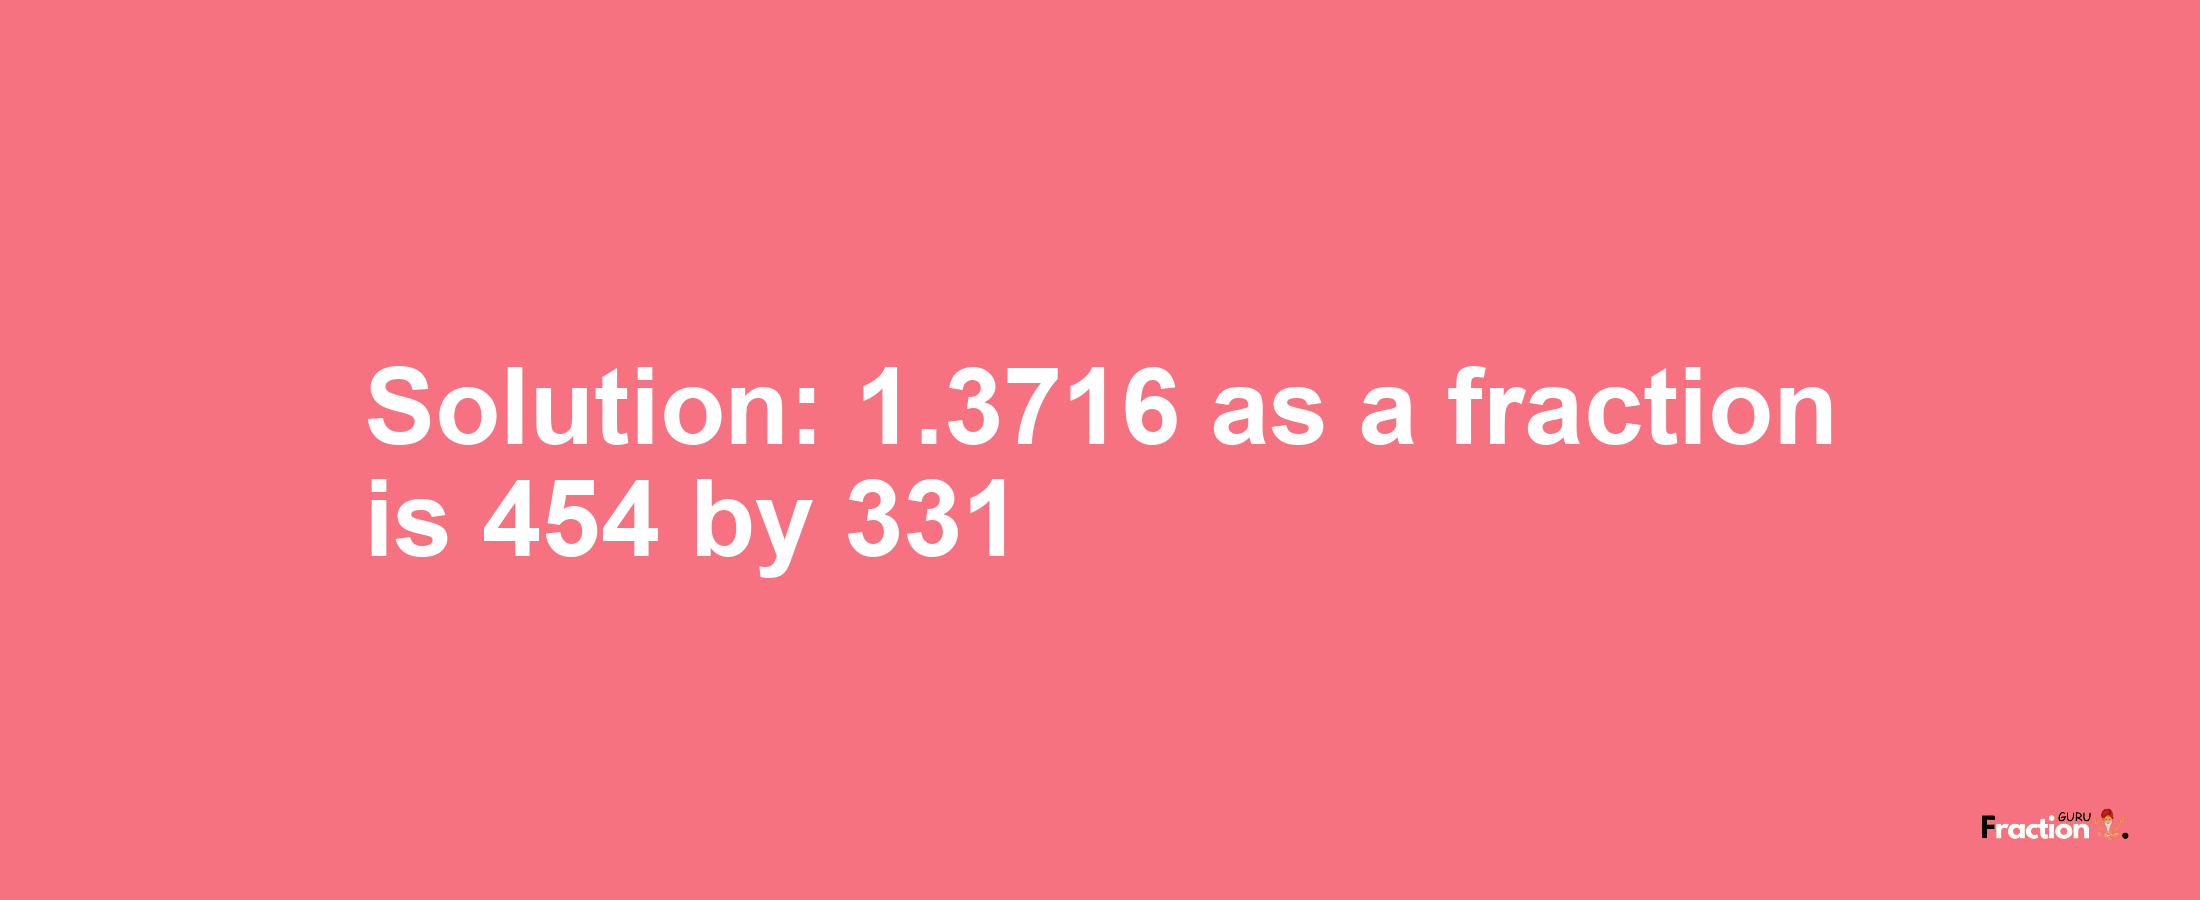 Solution:1.3716 as a fraction is 454/331